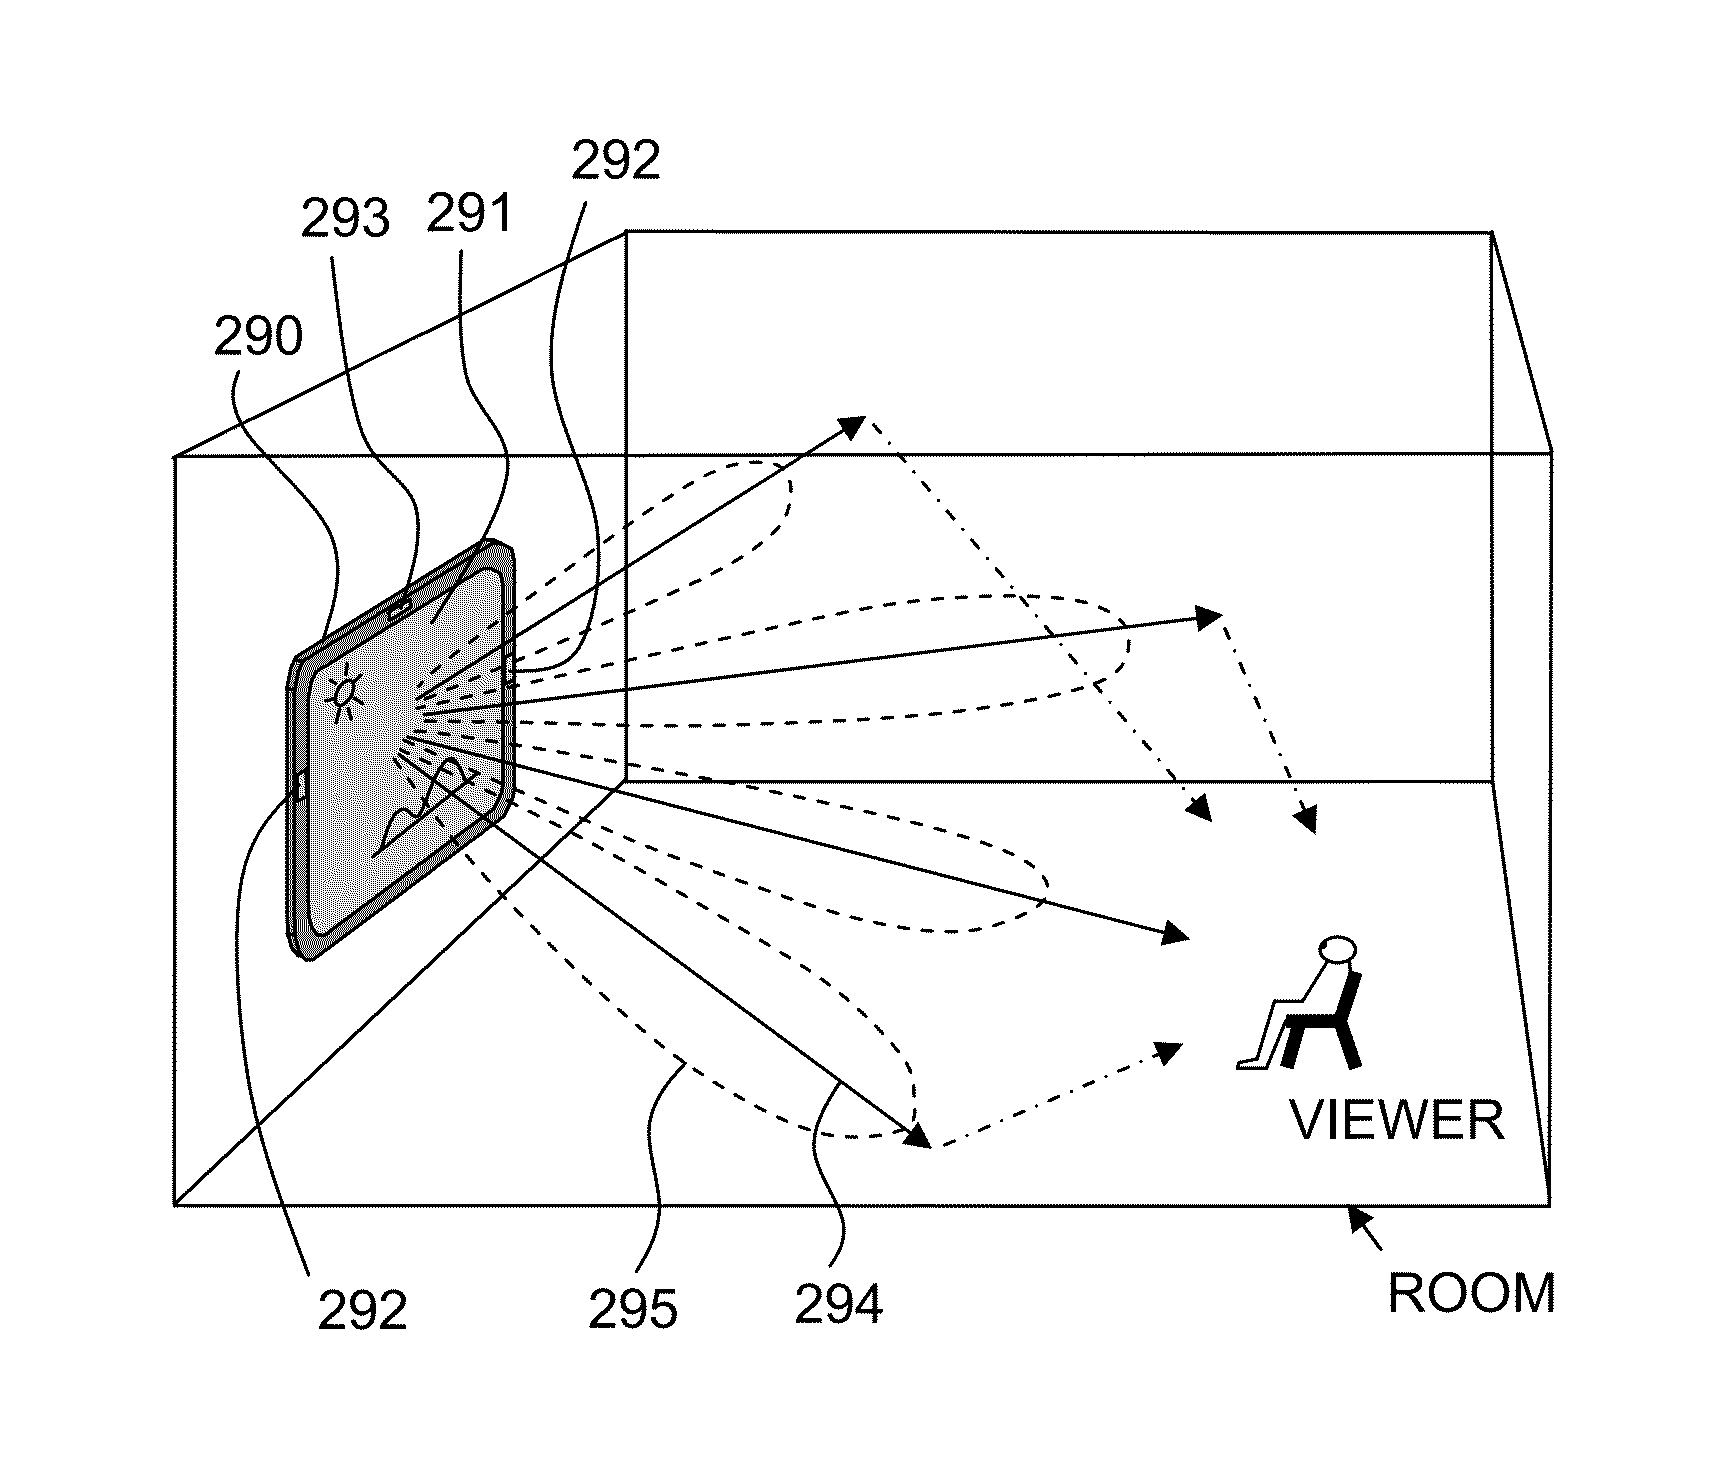 Flat panel displaying and sounding system integrating flat panel display with flat panel sounding unit array